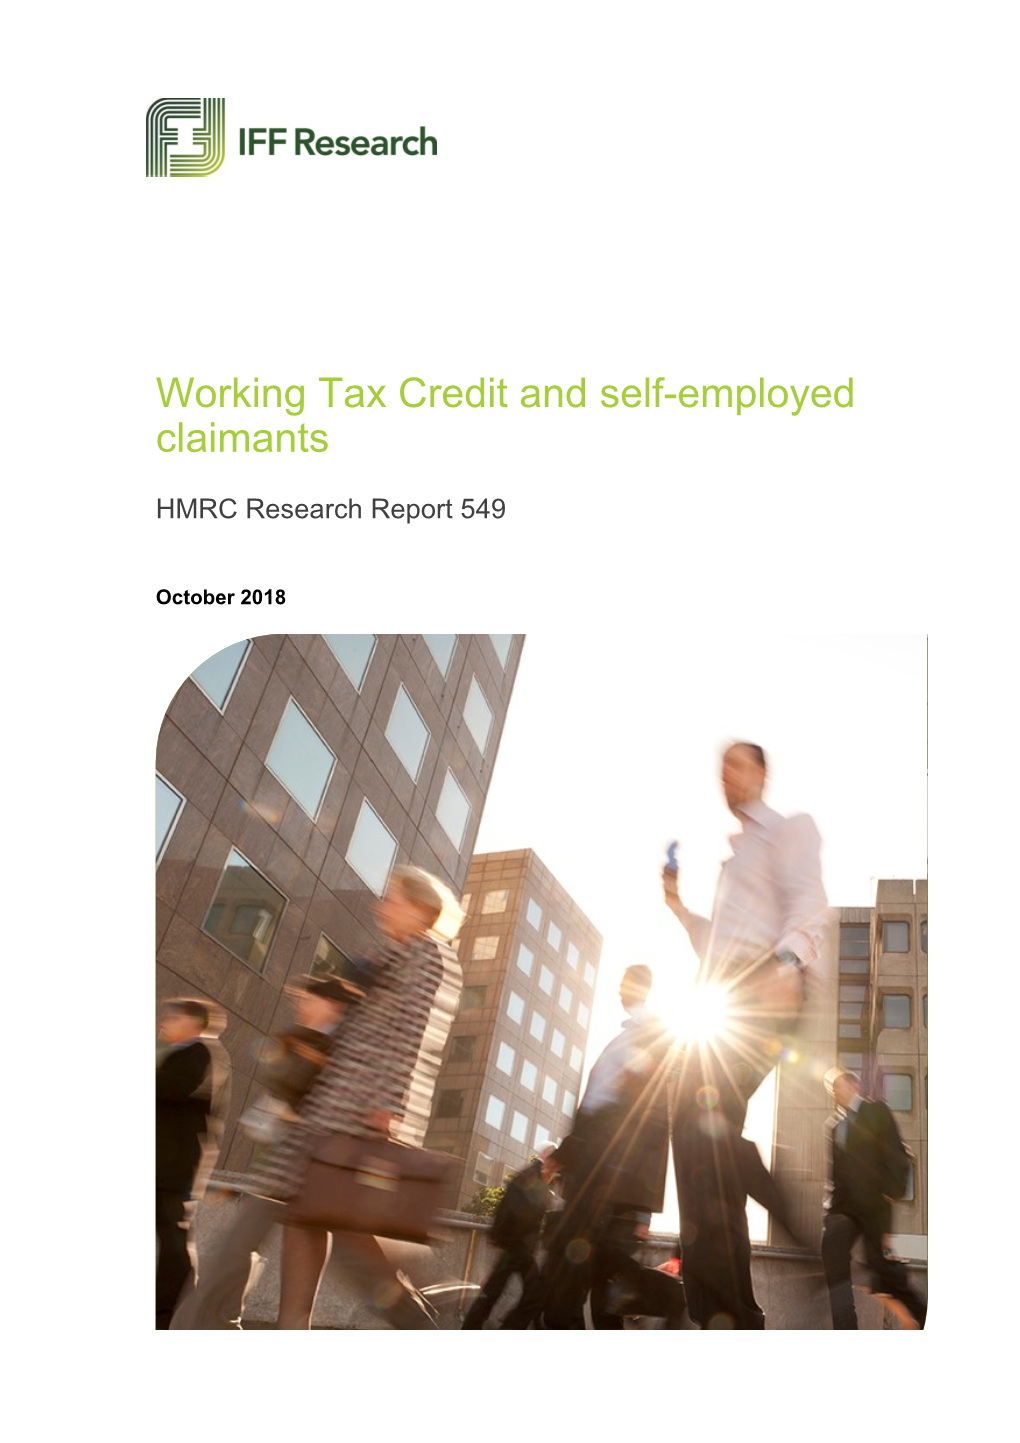 Working Tax Credit and Self-Employed Claimants